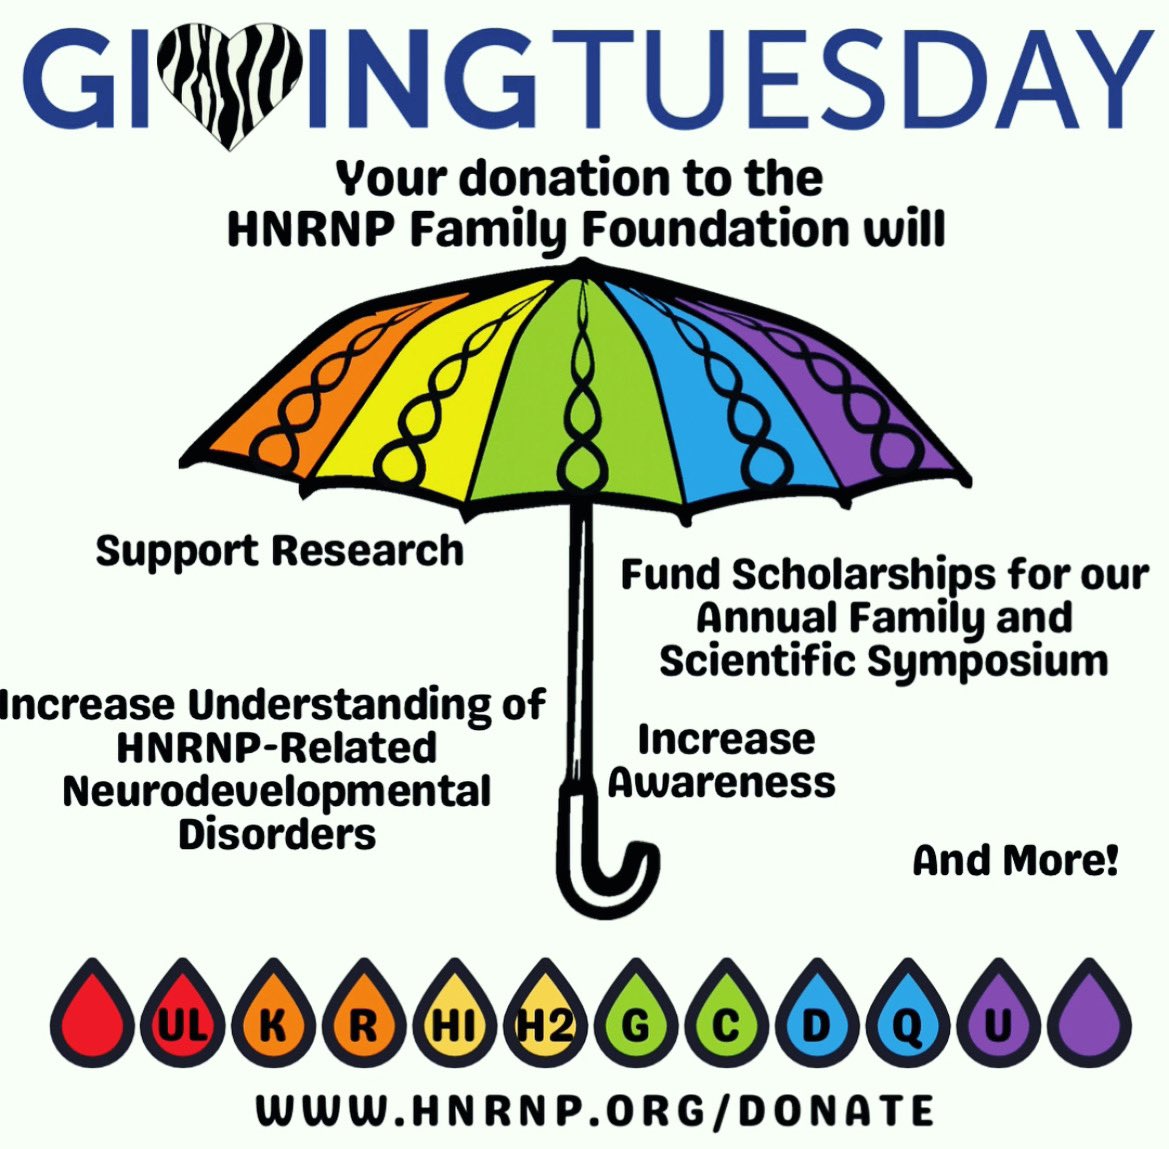 It’s #GIVINGTUESDAY! All donations go to research and supporting our HNRNP-RNDD community -including family meetings!